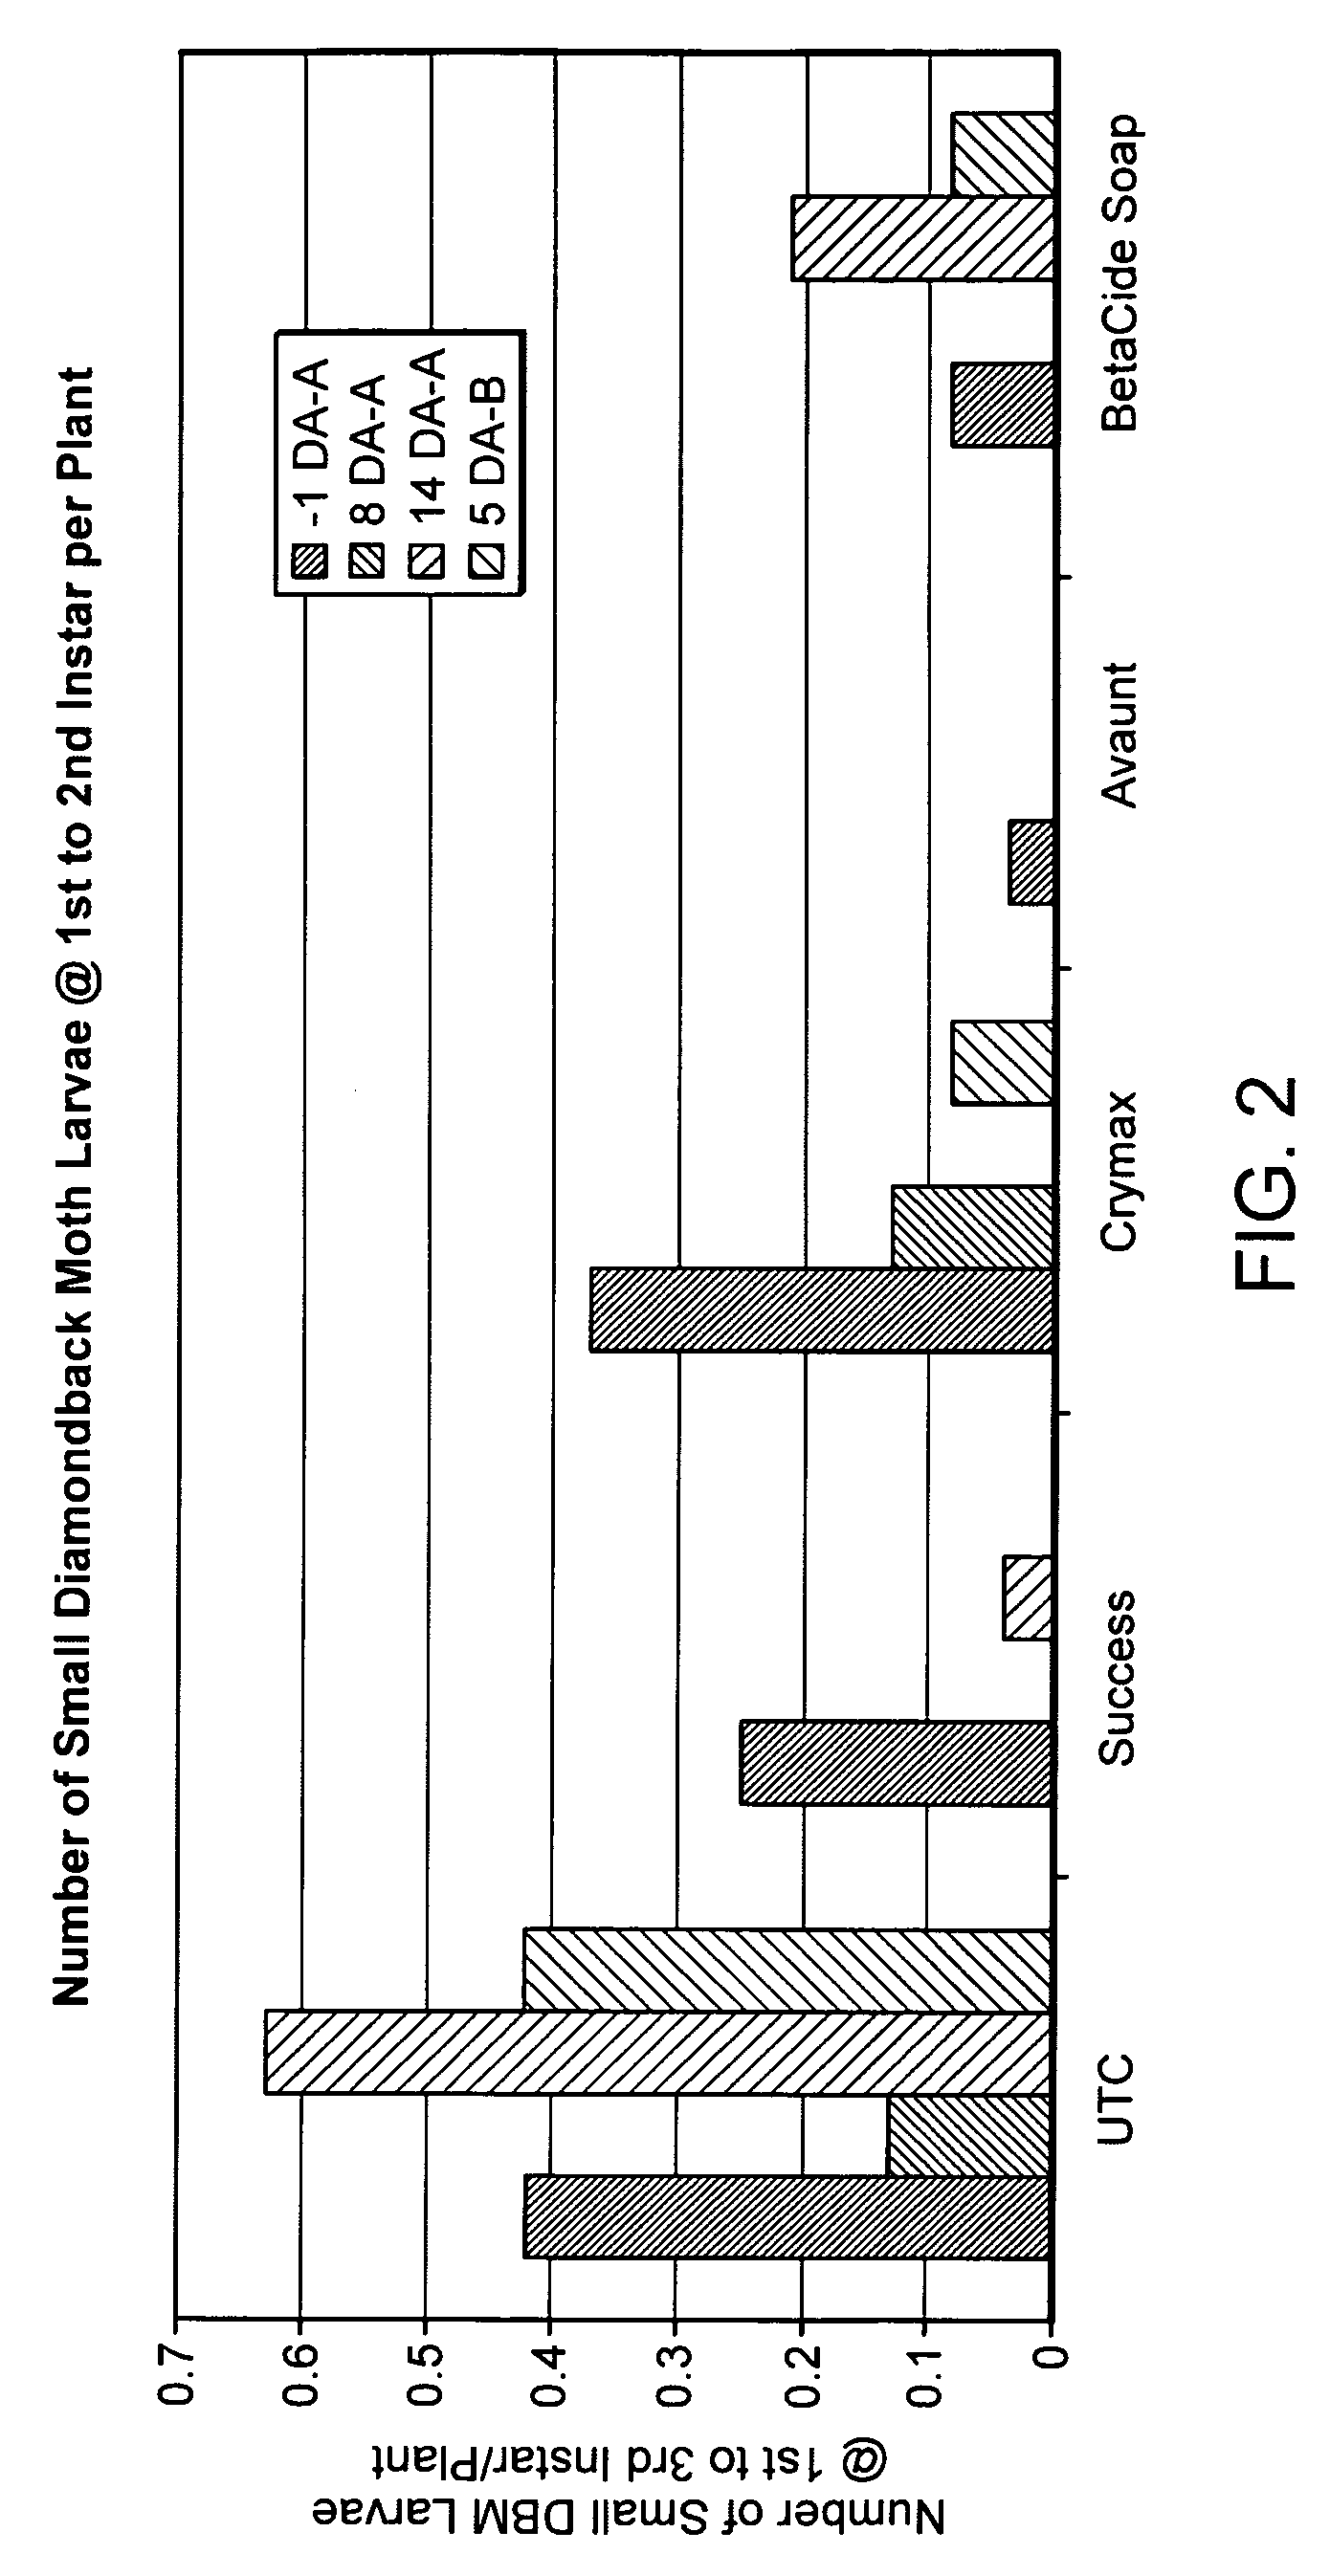 Compositions and methods for inhibiting a honey bee pathogen infection or controlling a hive infestation